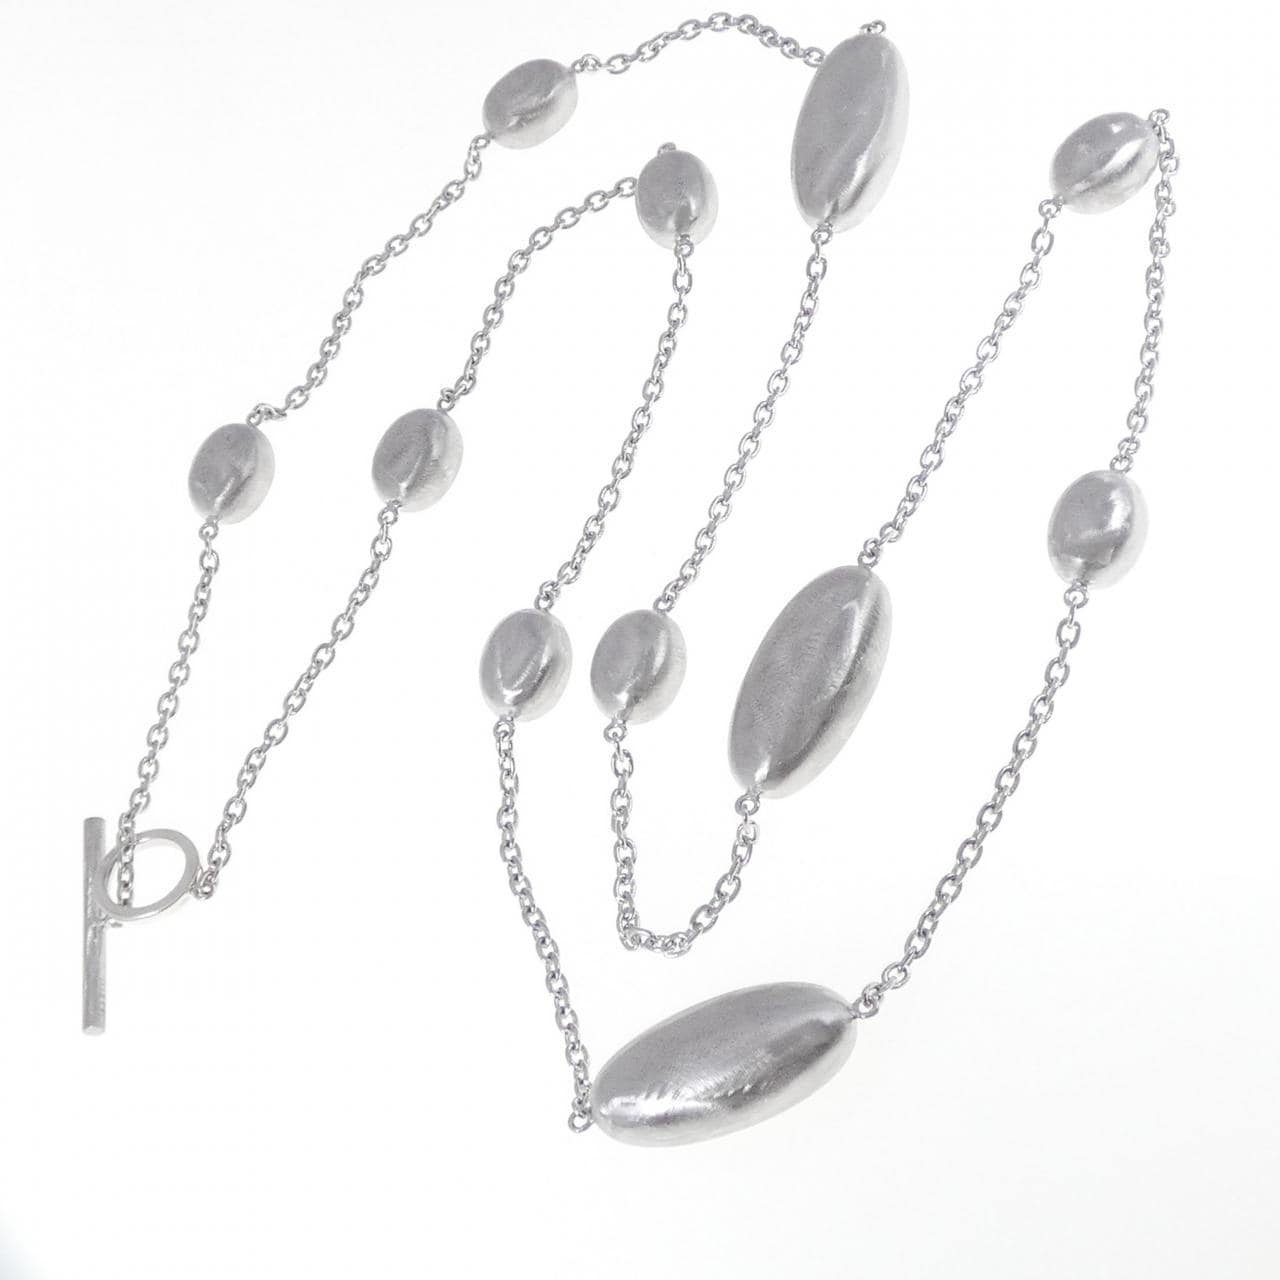 Nanis 925 Silver Necklace